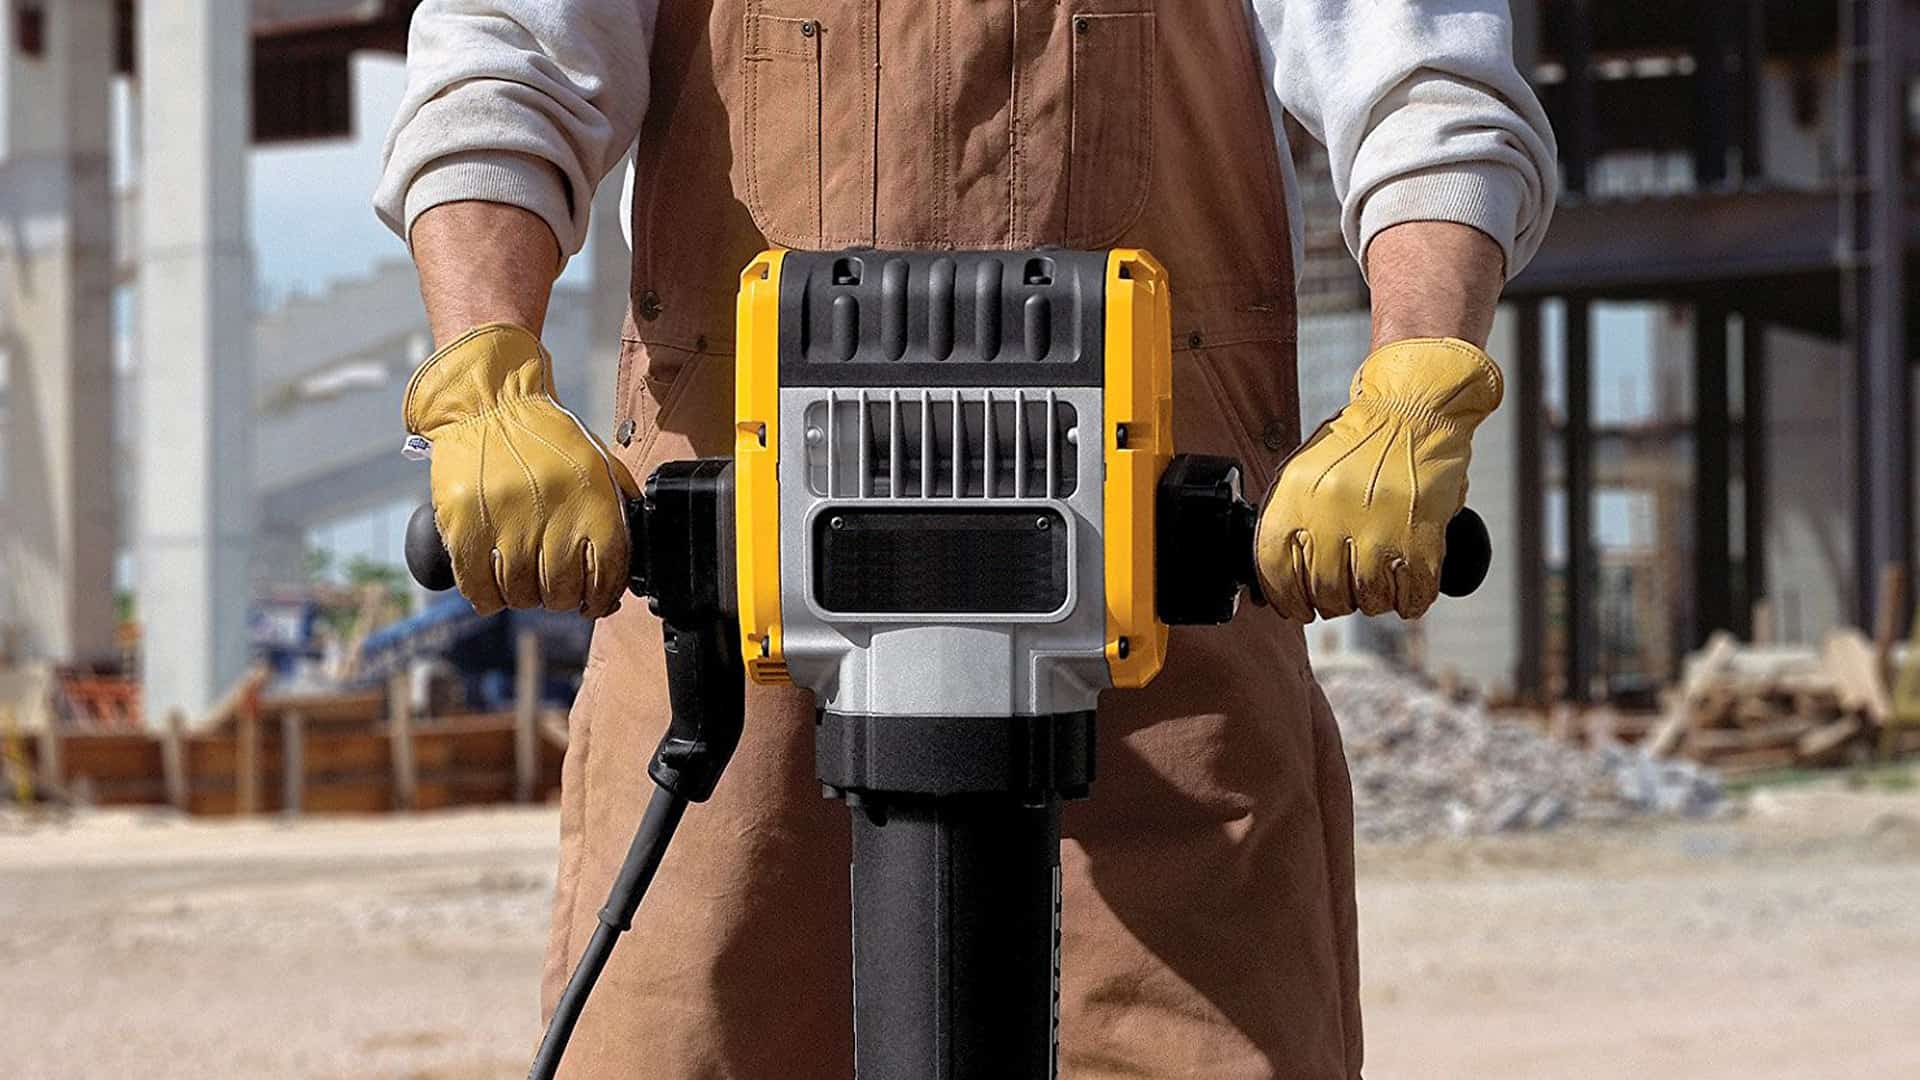 Vibration magnitudes of some common Power Tools